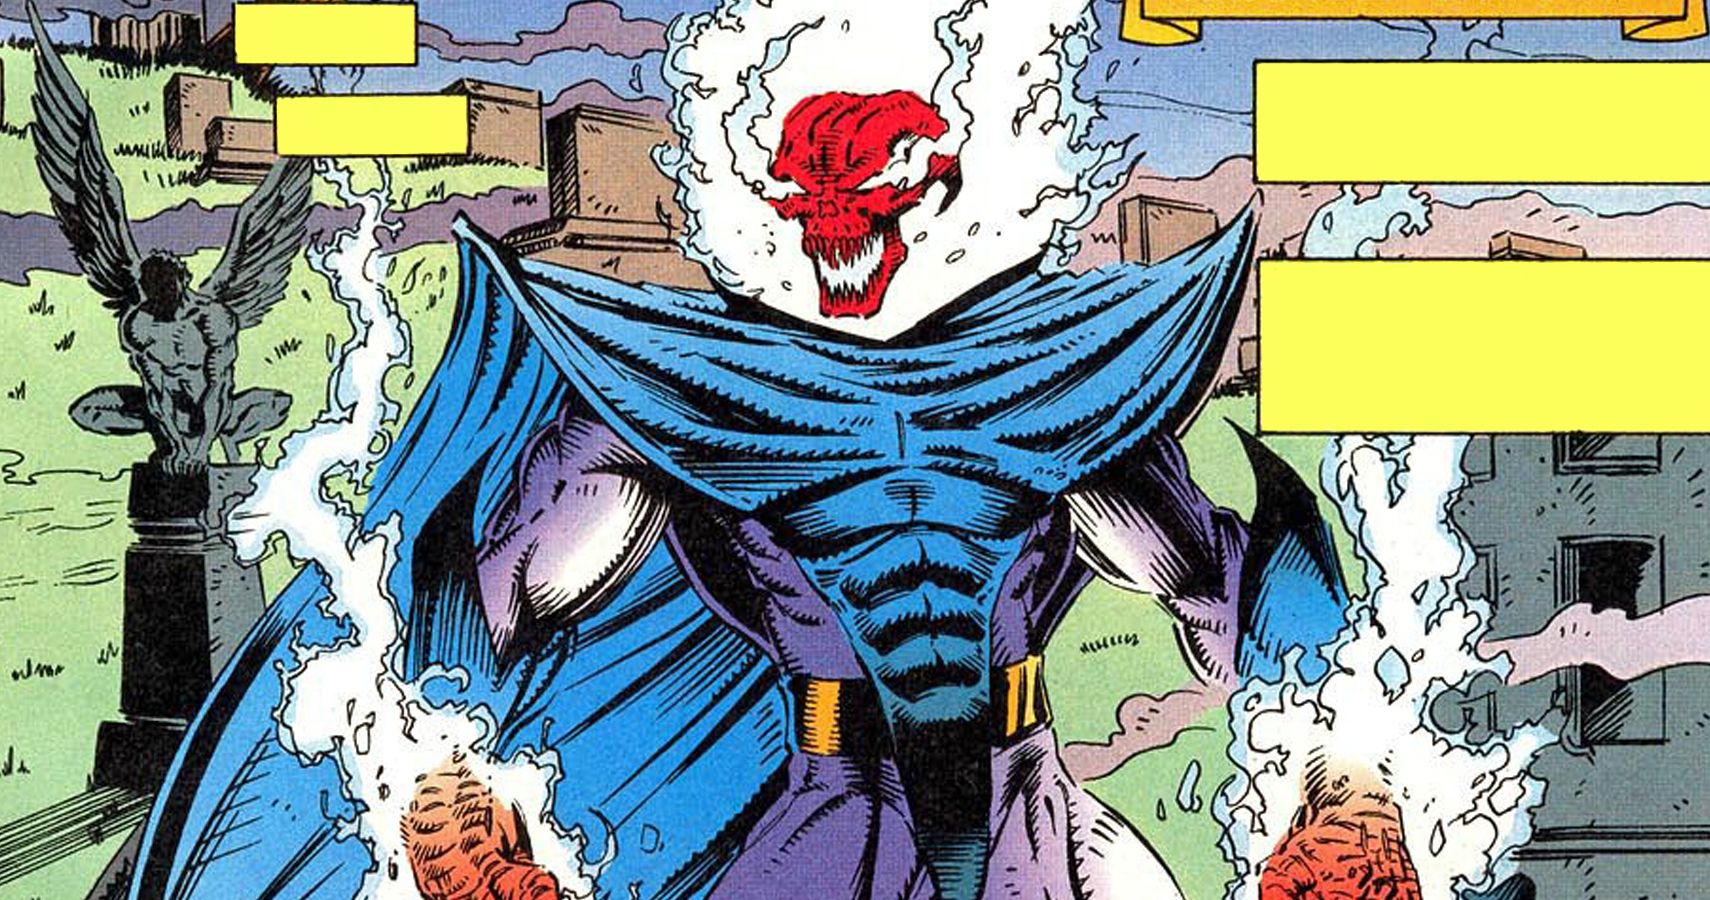 Zarathos from the comics with fiery red skull and smoke coming from hands and head.